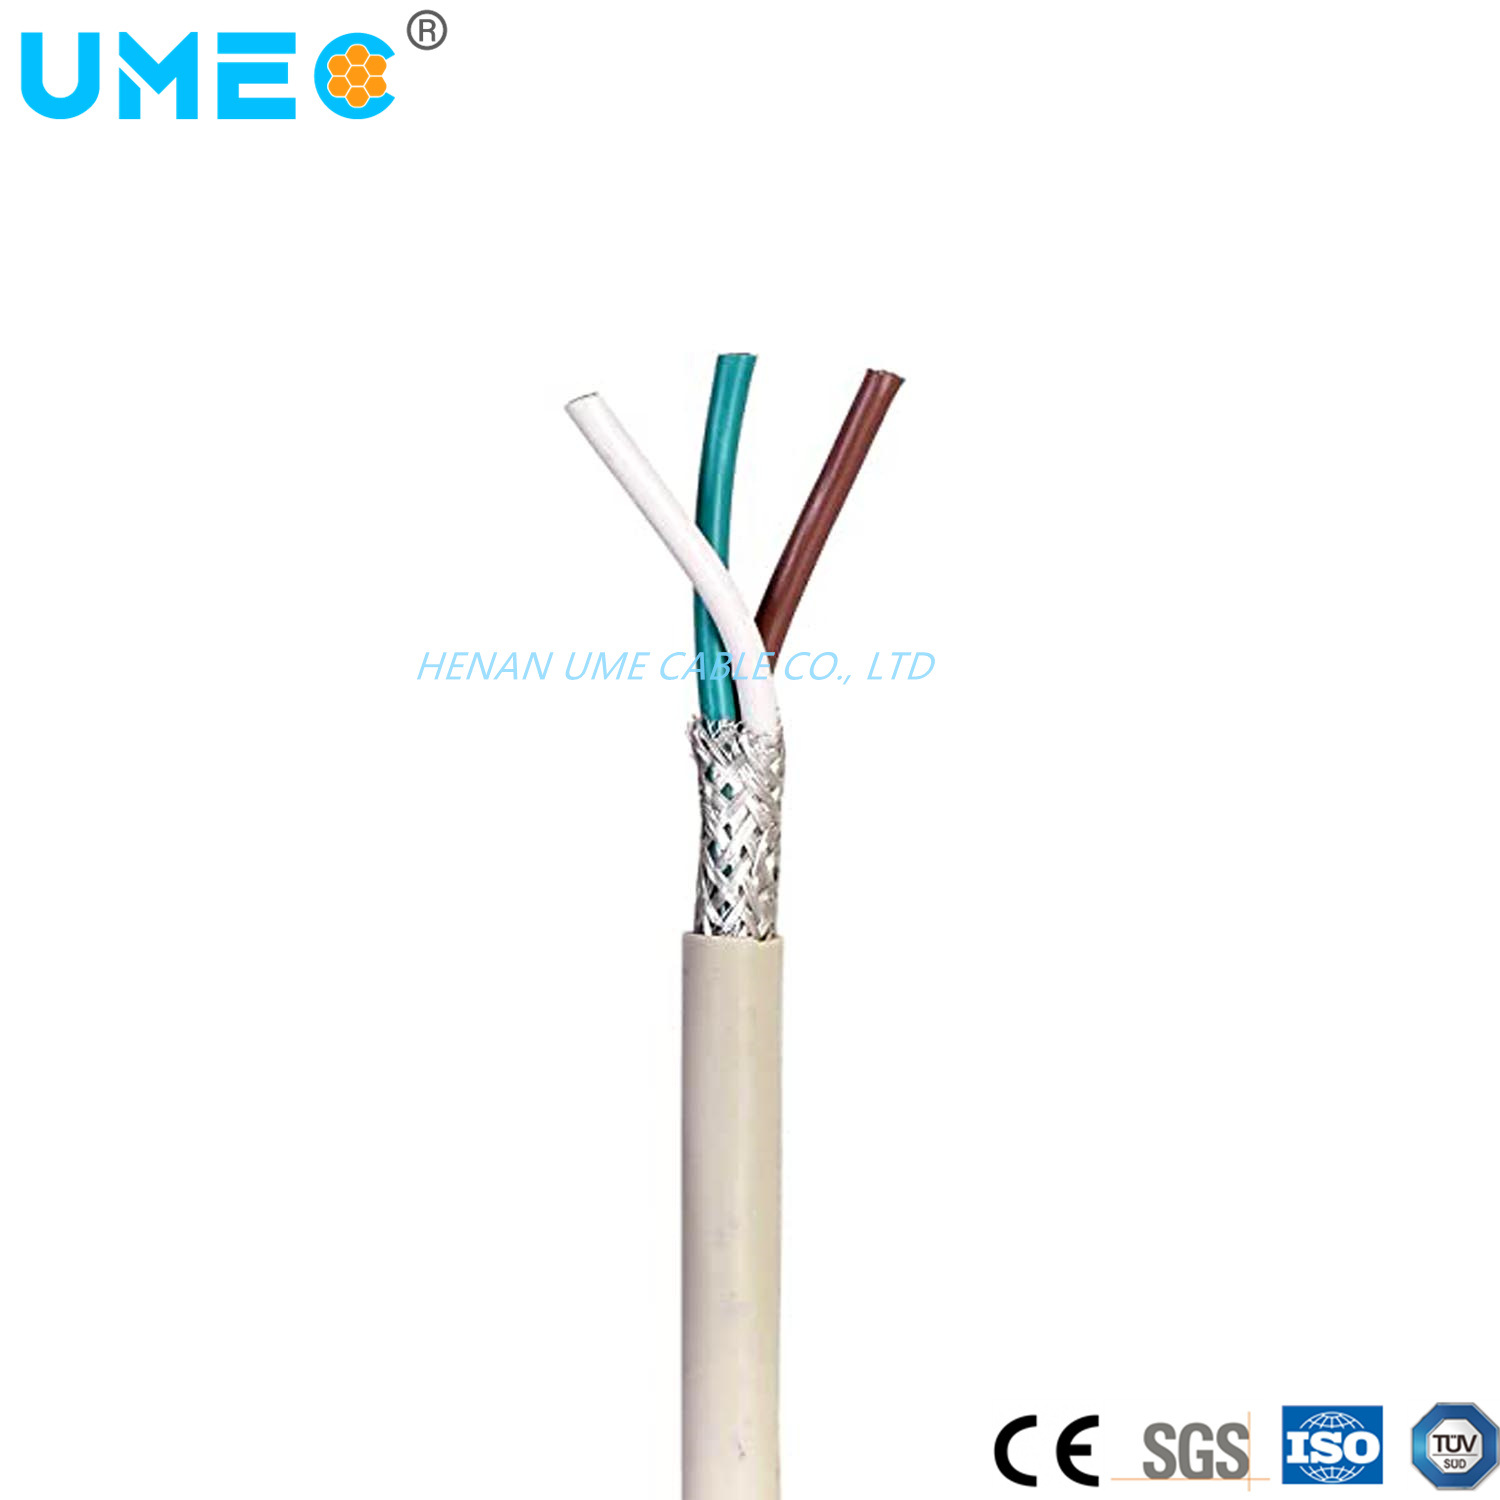 Low Voltage 350V 500V Class 5 Flexible Stranded Copper PVC Insulated Braided Shielding Liycy Cable Wire